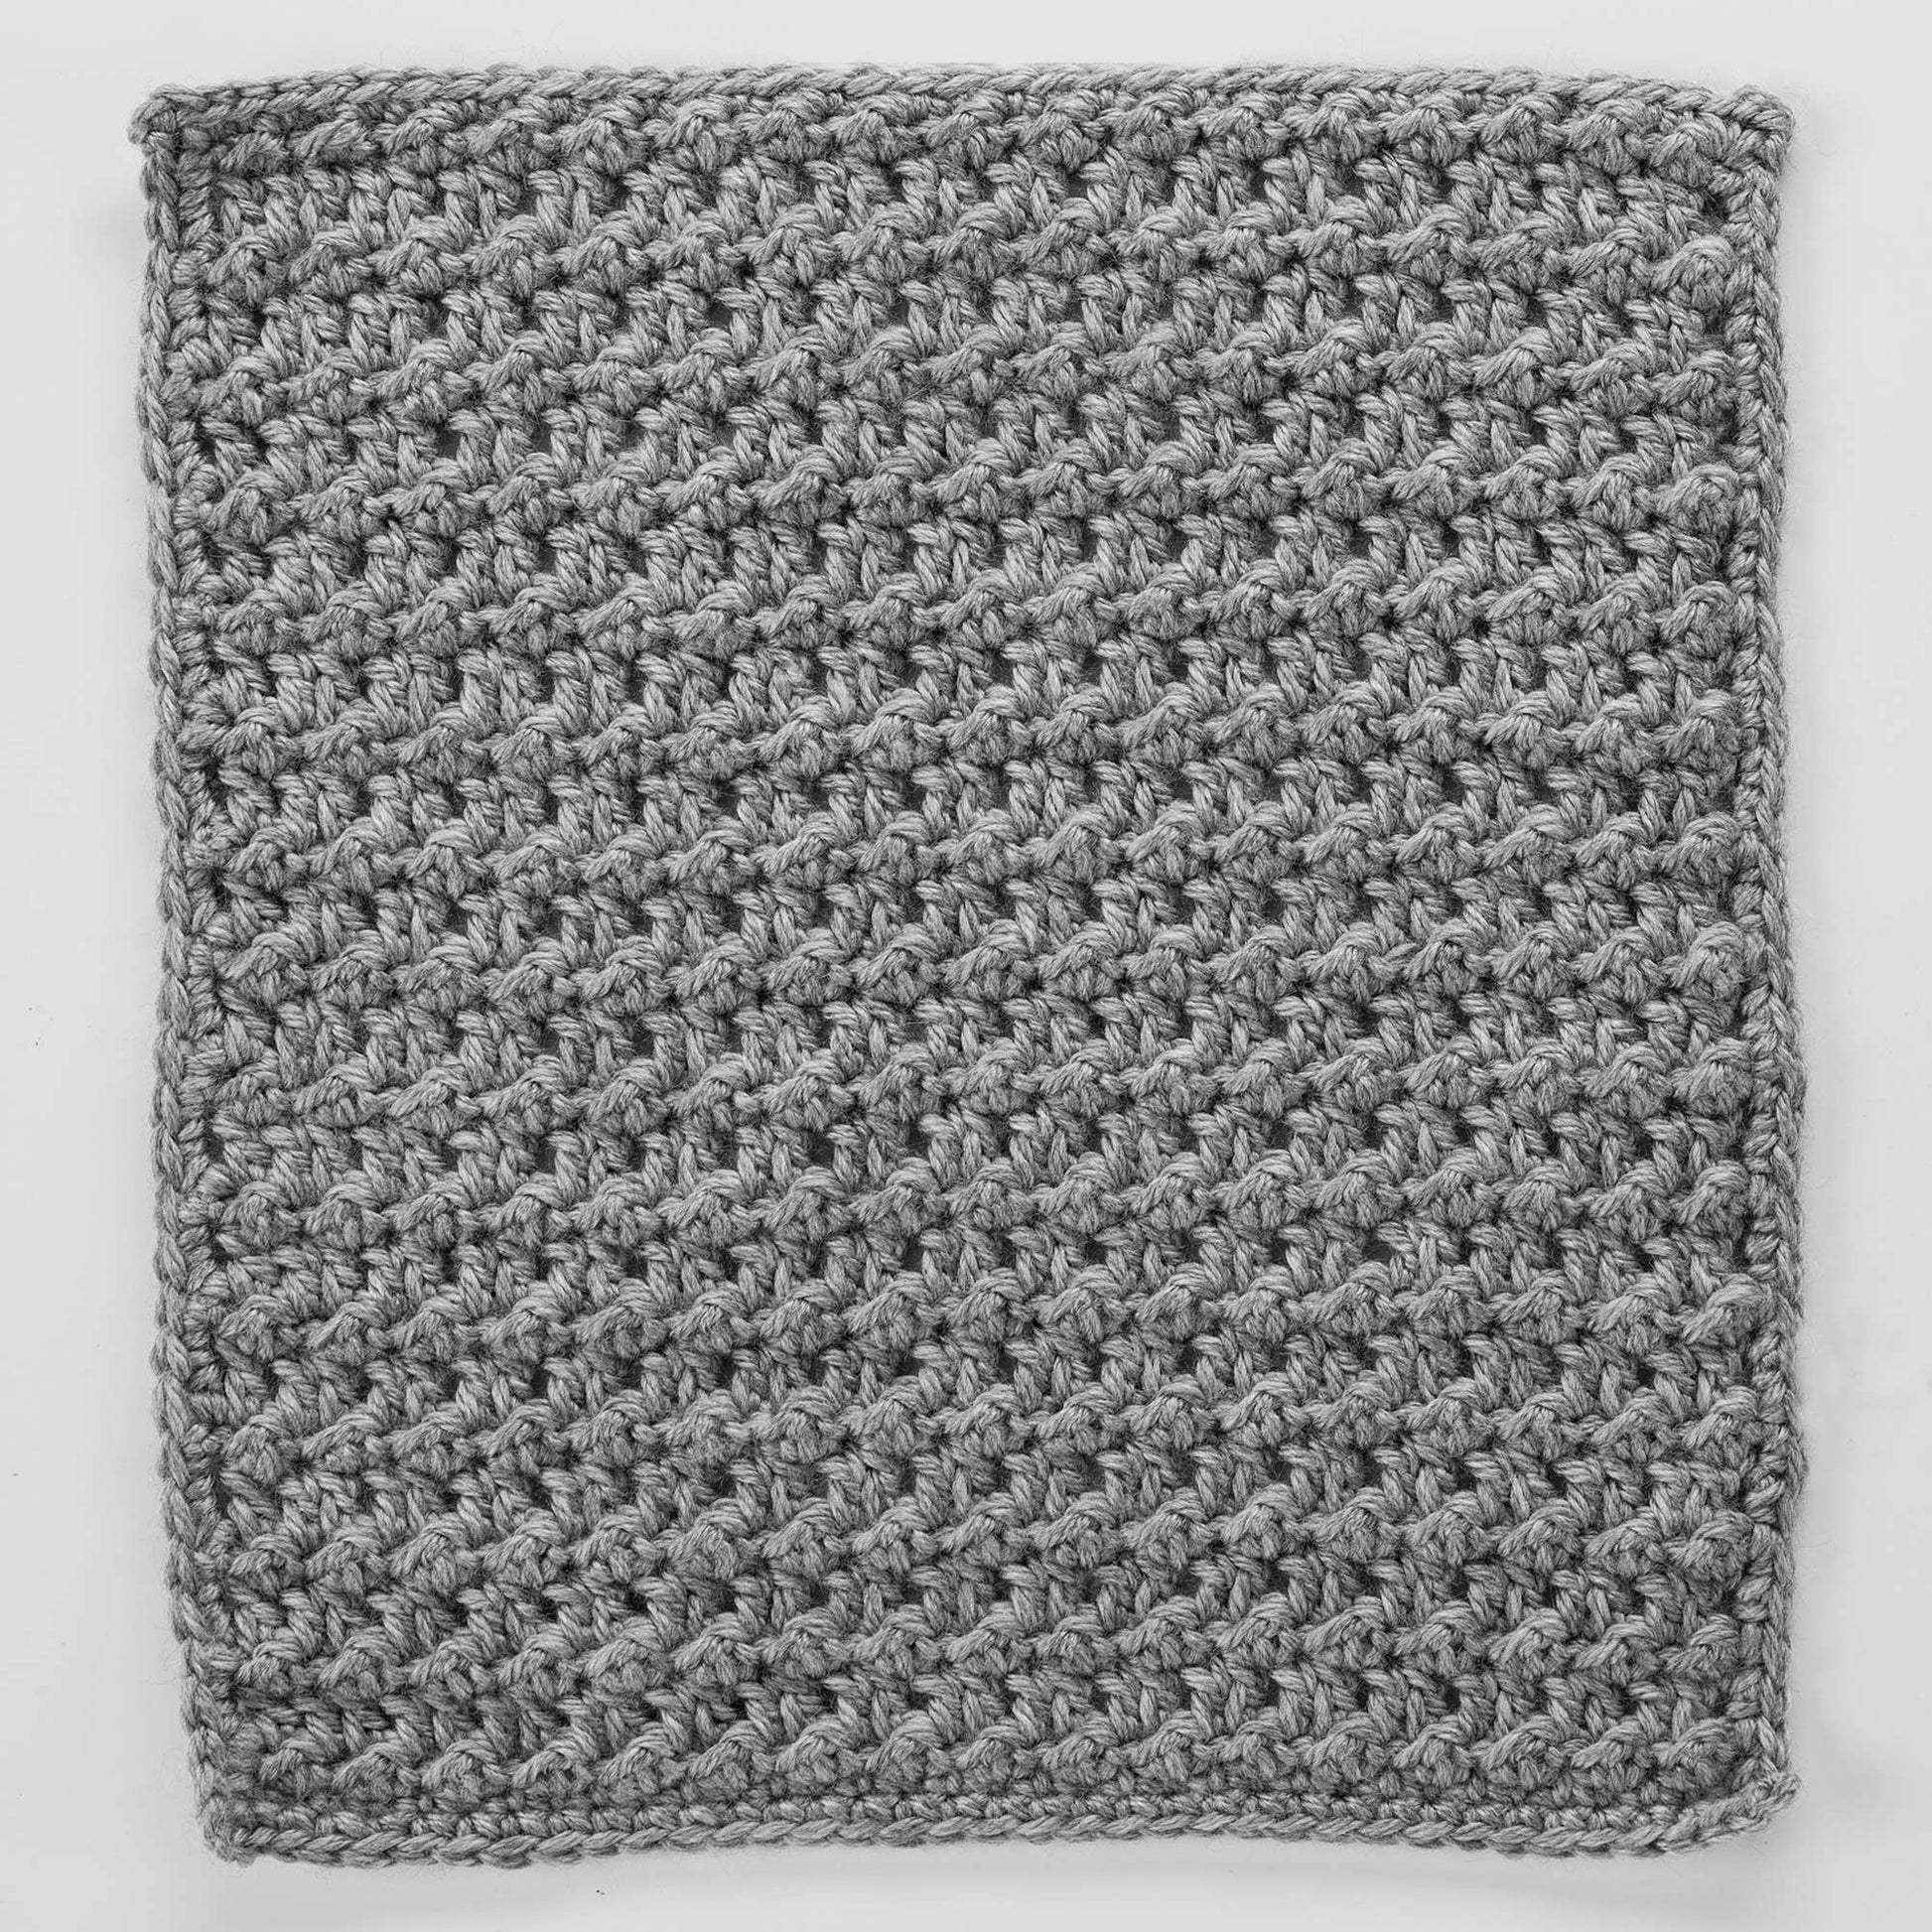 Free Red Heart Double Crochet & Slip Stitch Square For Checkerboard Textures Throw Pattern